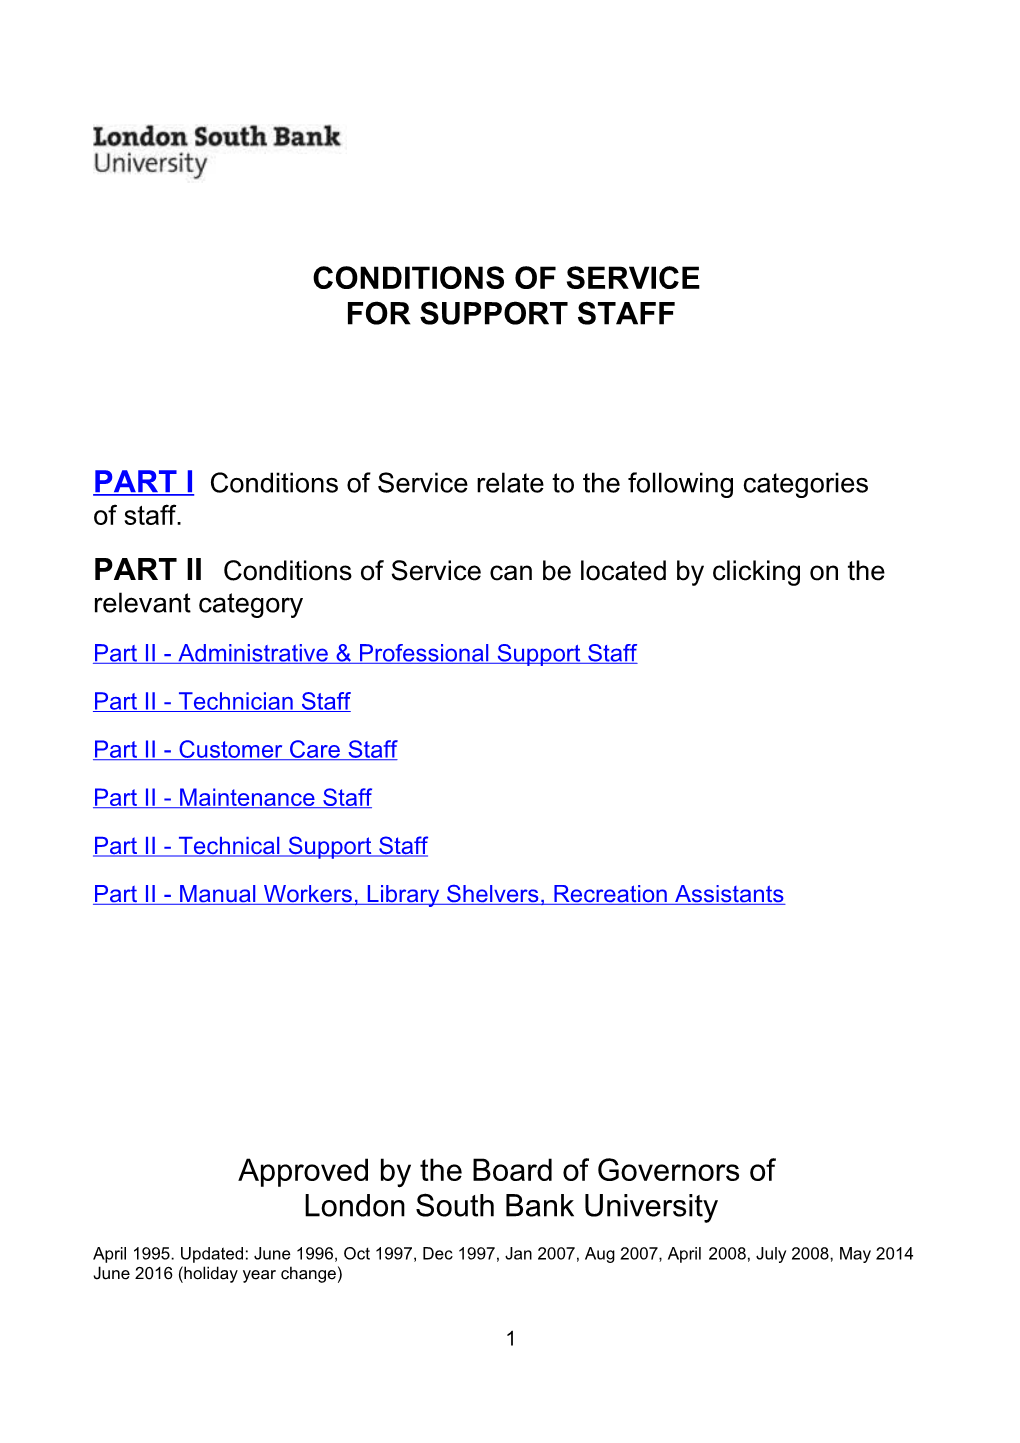 Conditions of Service for Support Staff